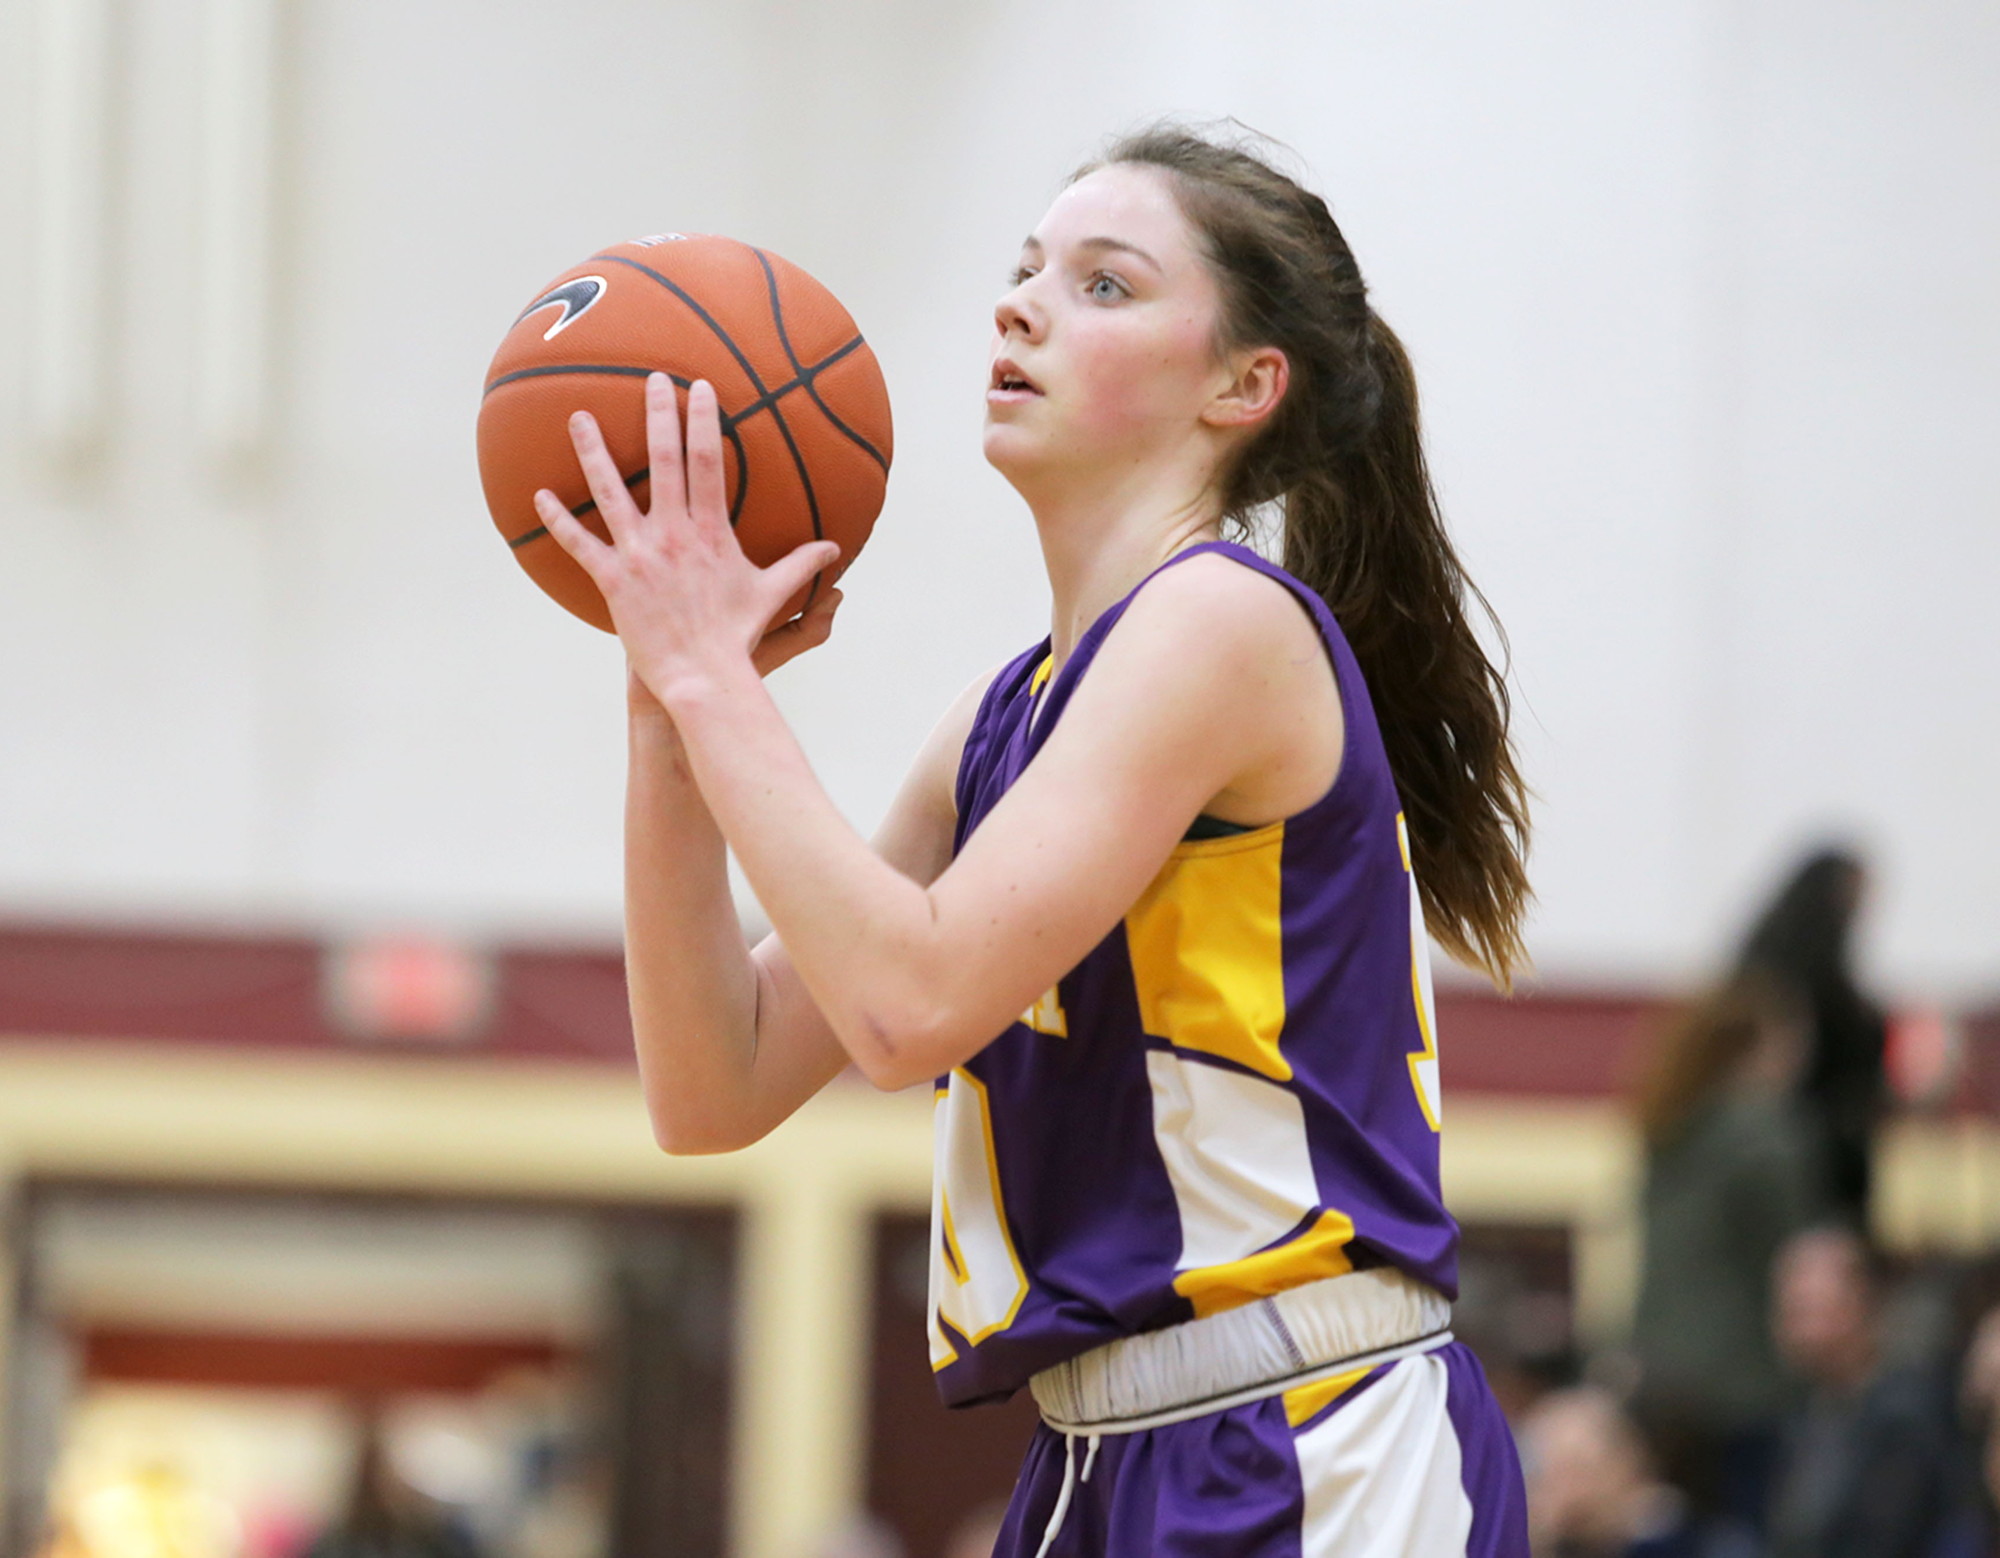 City resident and Wheeler School junior Anna Metcalf netted the 1,000th point of her career this winter, helping the Warriors go unbeaten and win the Division III girls' hoops title.